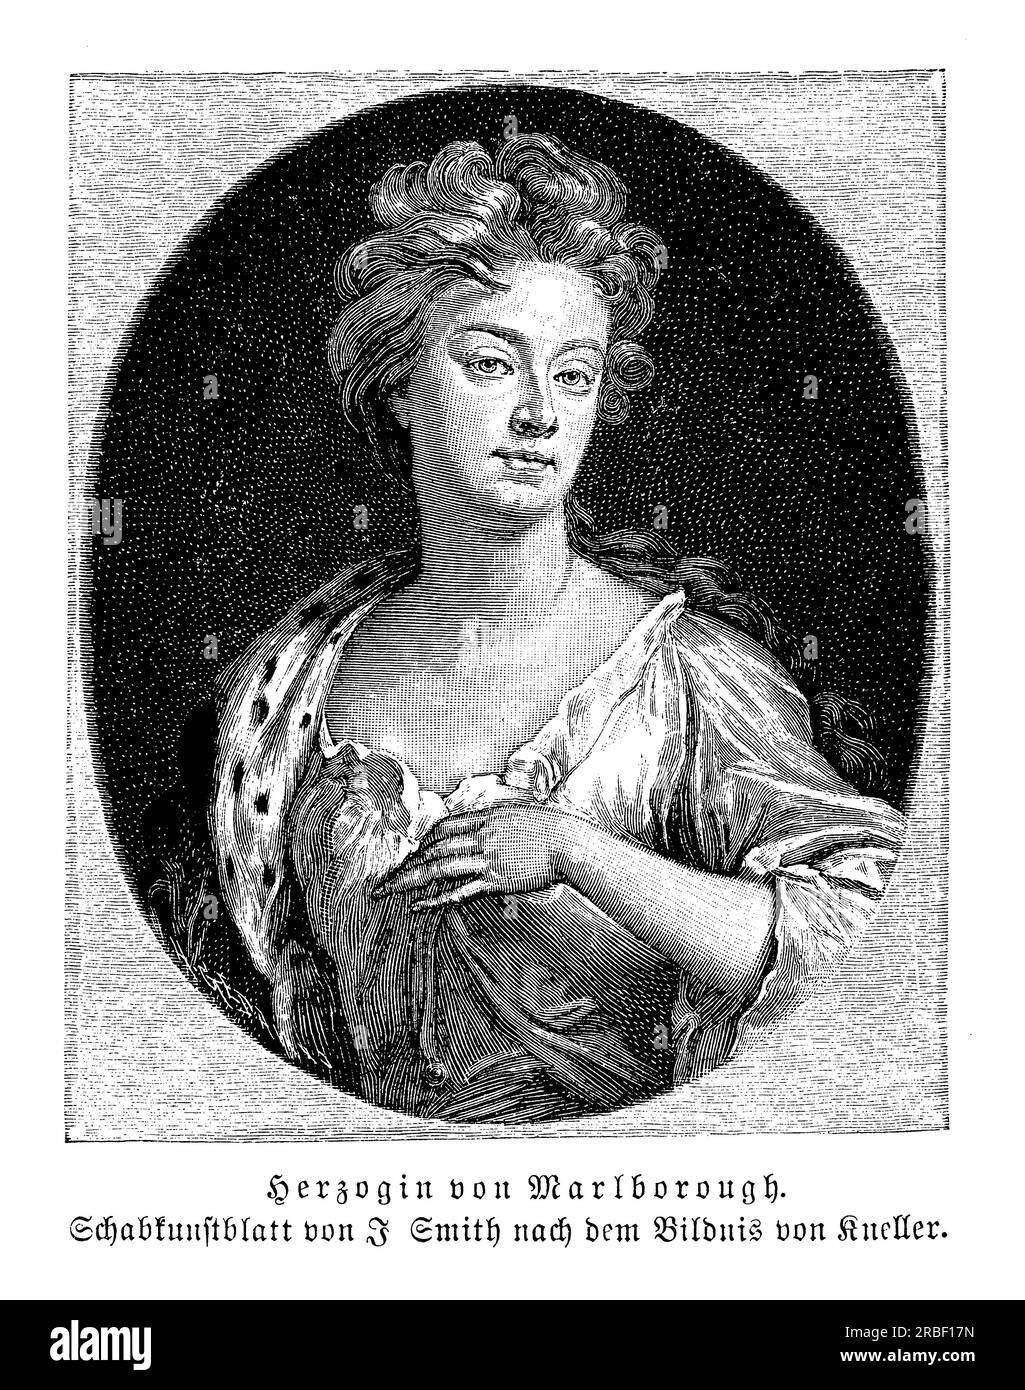 The Duchess of Marlborough, Sarah Churchill, was the wife of John Churchill, 1st Duke of Marlborough, and a prominent figure in British society during the early 18th century. She was known for her close friendship with Queen Anne, who appointed her as the Keeper of the Privy Purse and the Groom of the Stole. Sarah was also a shrewd political operator and played a key role in her husband's career, helping him to secure military commissions and political appointments. Despite her many accomplishments, Sarah was a controversial figure, and she faced criticism from political opponents and personal Stock Photo